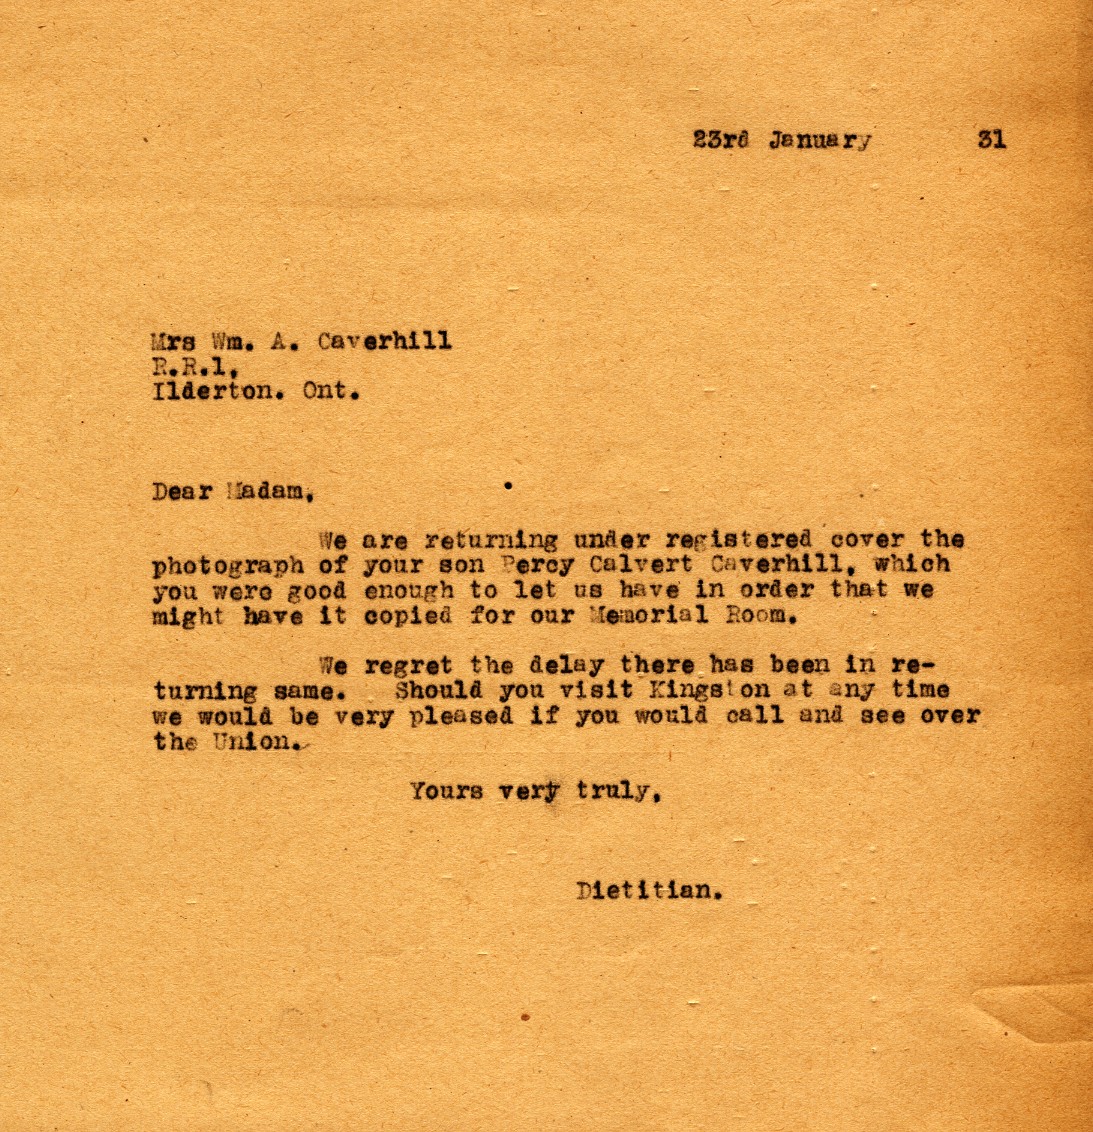 Letter from the Dietitian to Mrs. Wm. A. Caverhill, 23rd January 1931